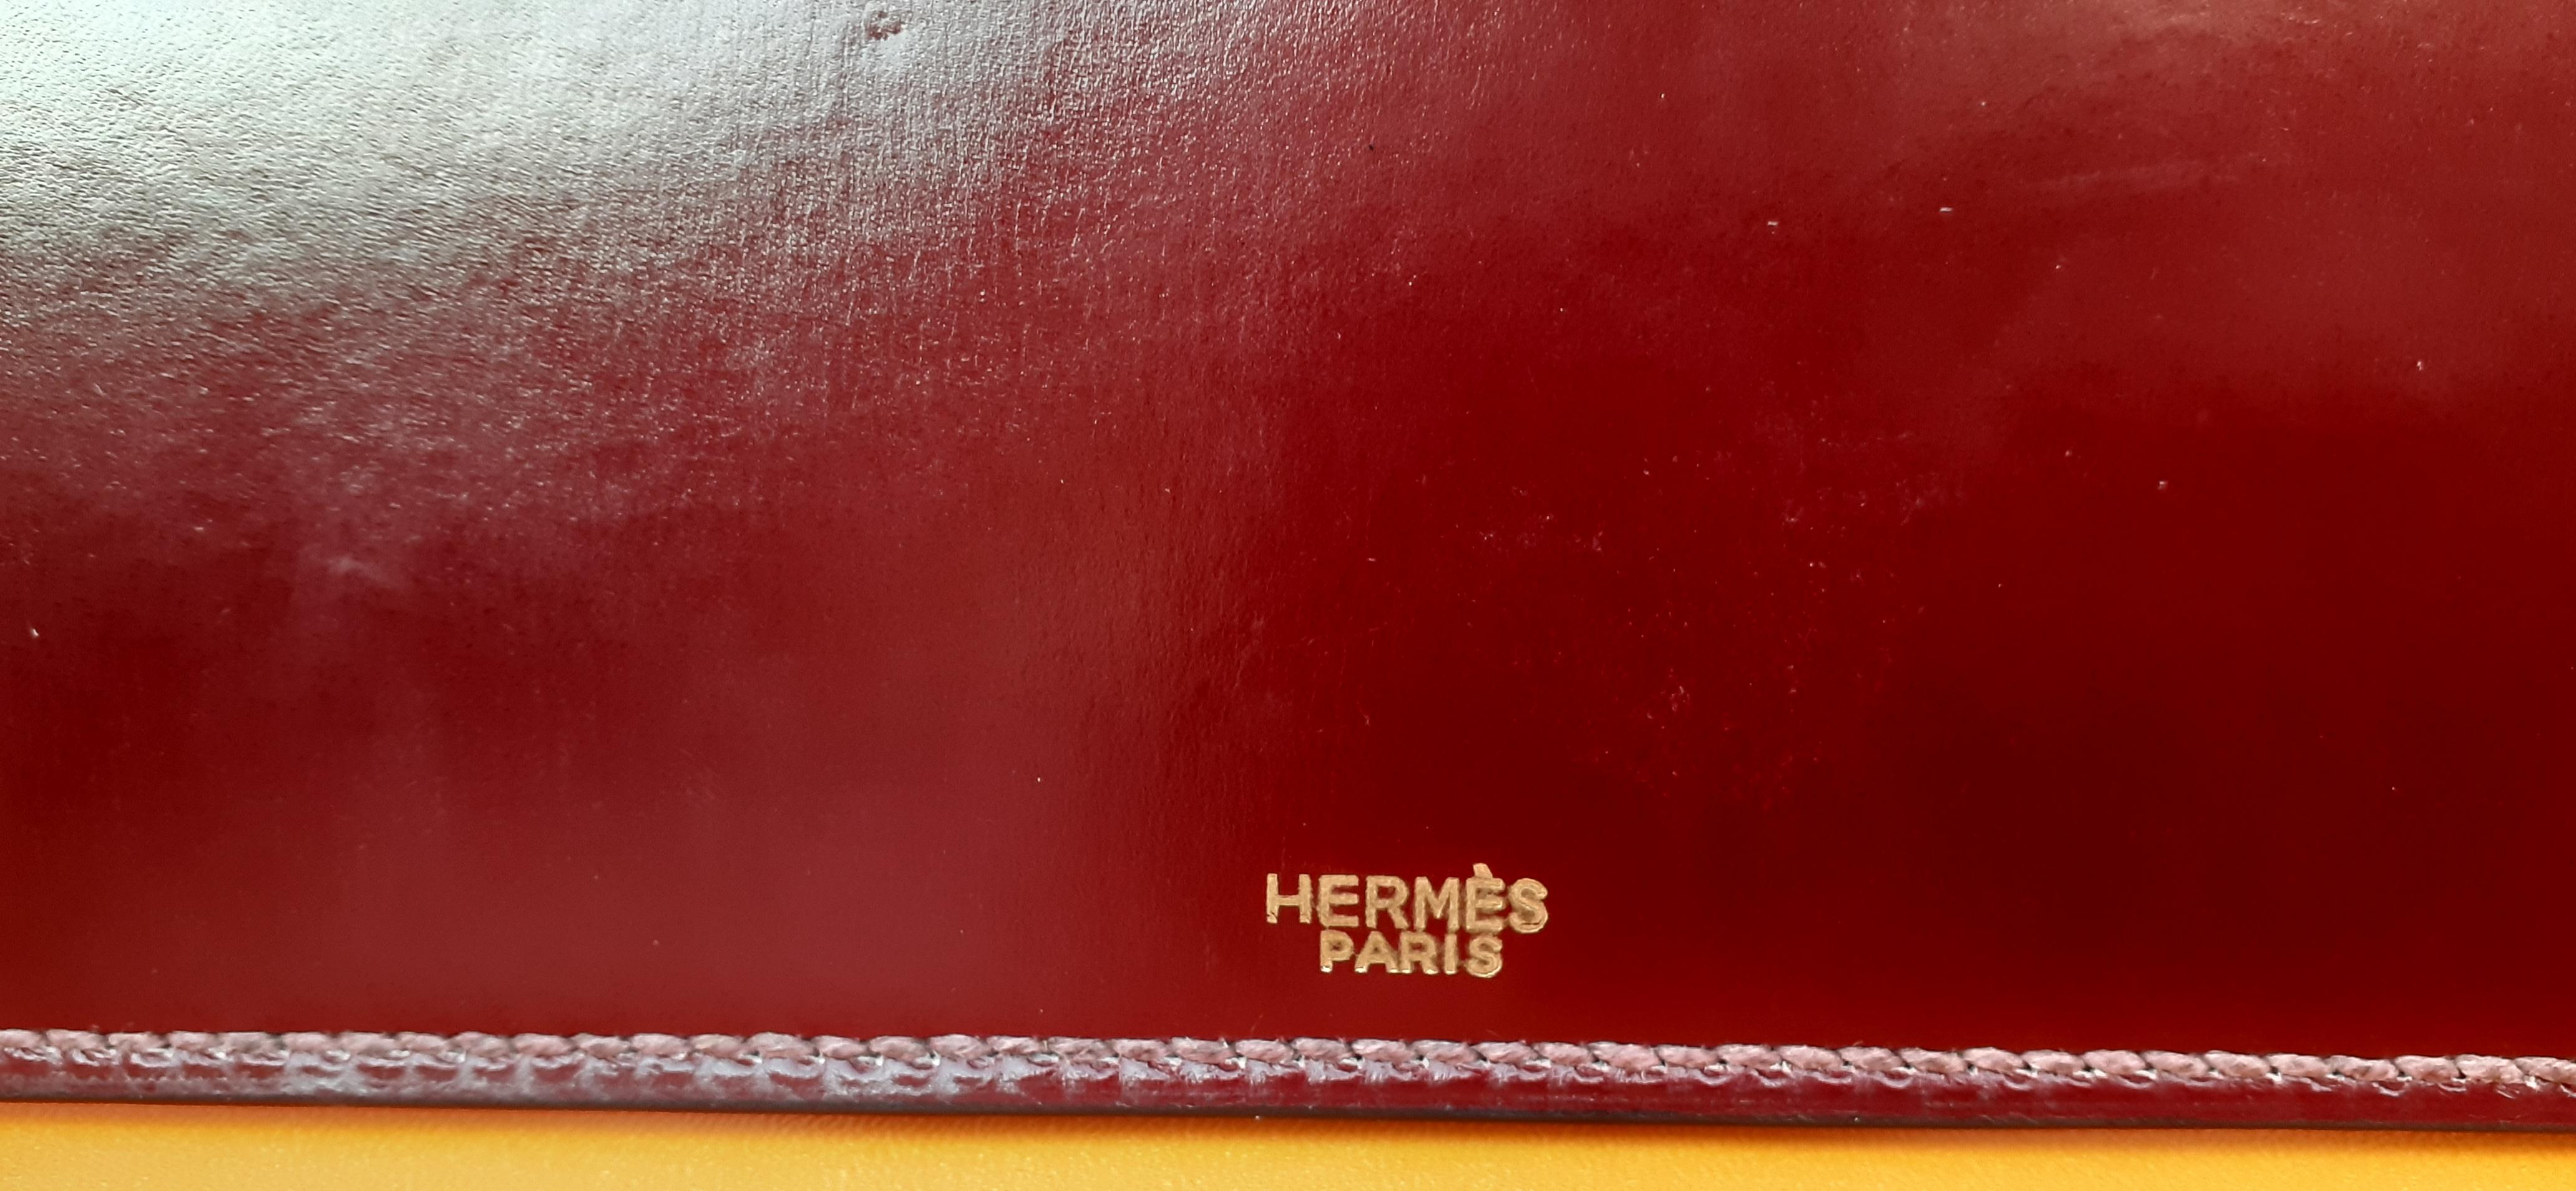 Exceptional Hermès Tie Hanger Tie Rack 3 Stirrups in Metal and Leather For Sale 6